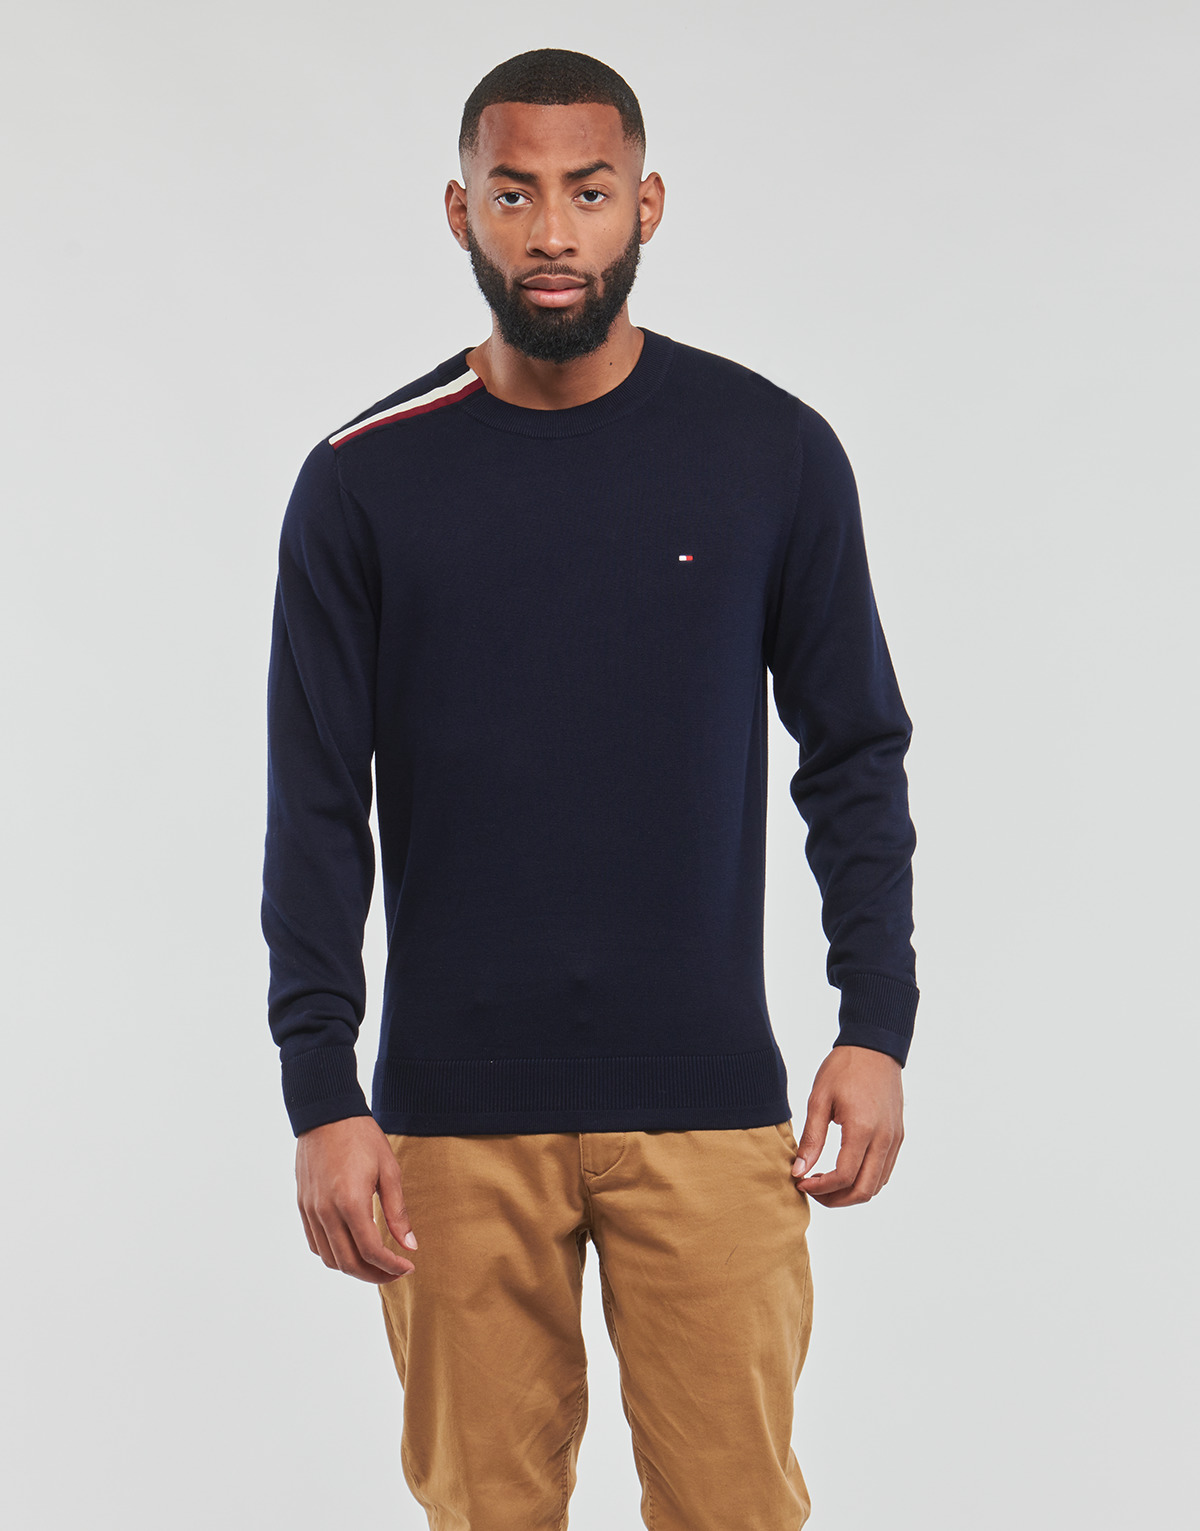 Tommy Hilfiger Marine GLOBAL STP PLACEMENT CREW NECK N0gQmywY